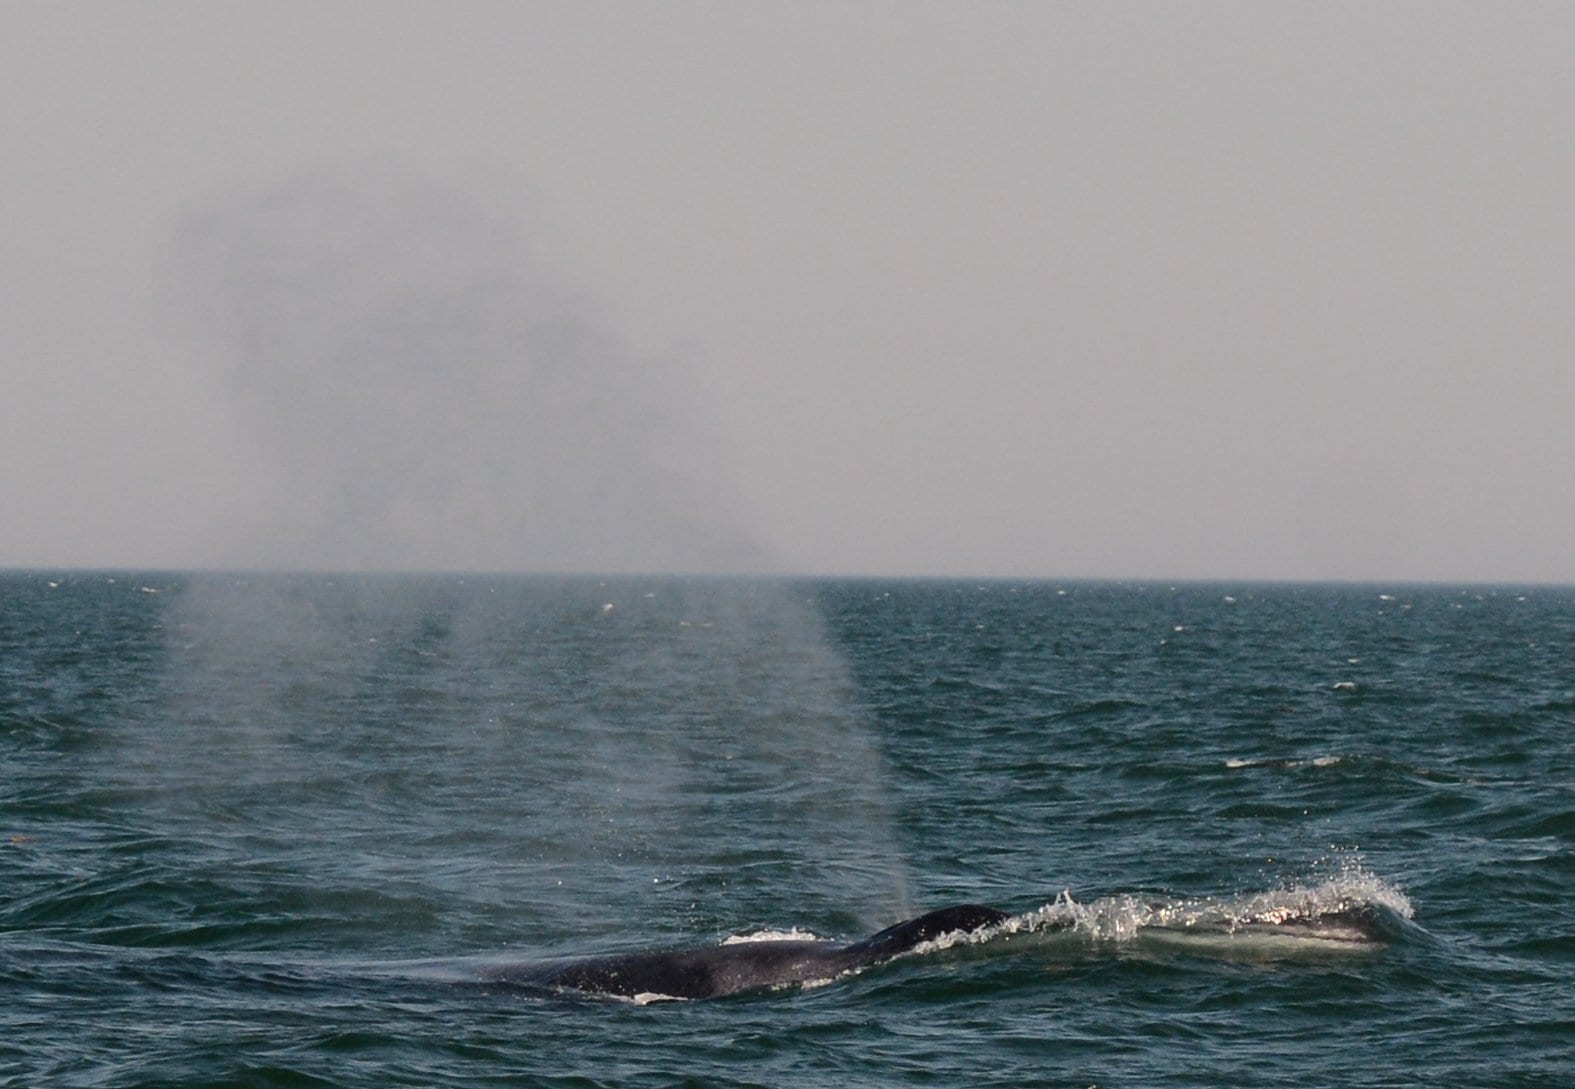 Fin whale surfacing 